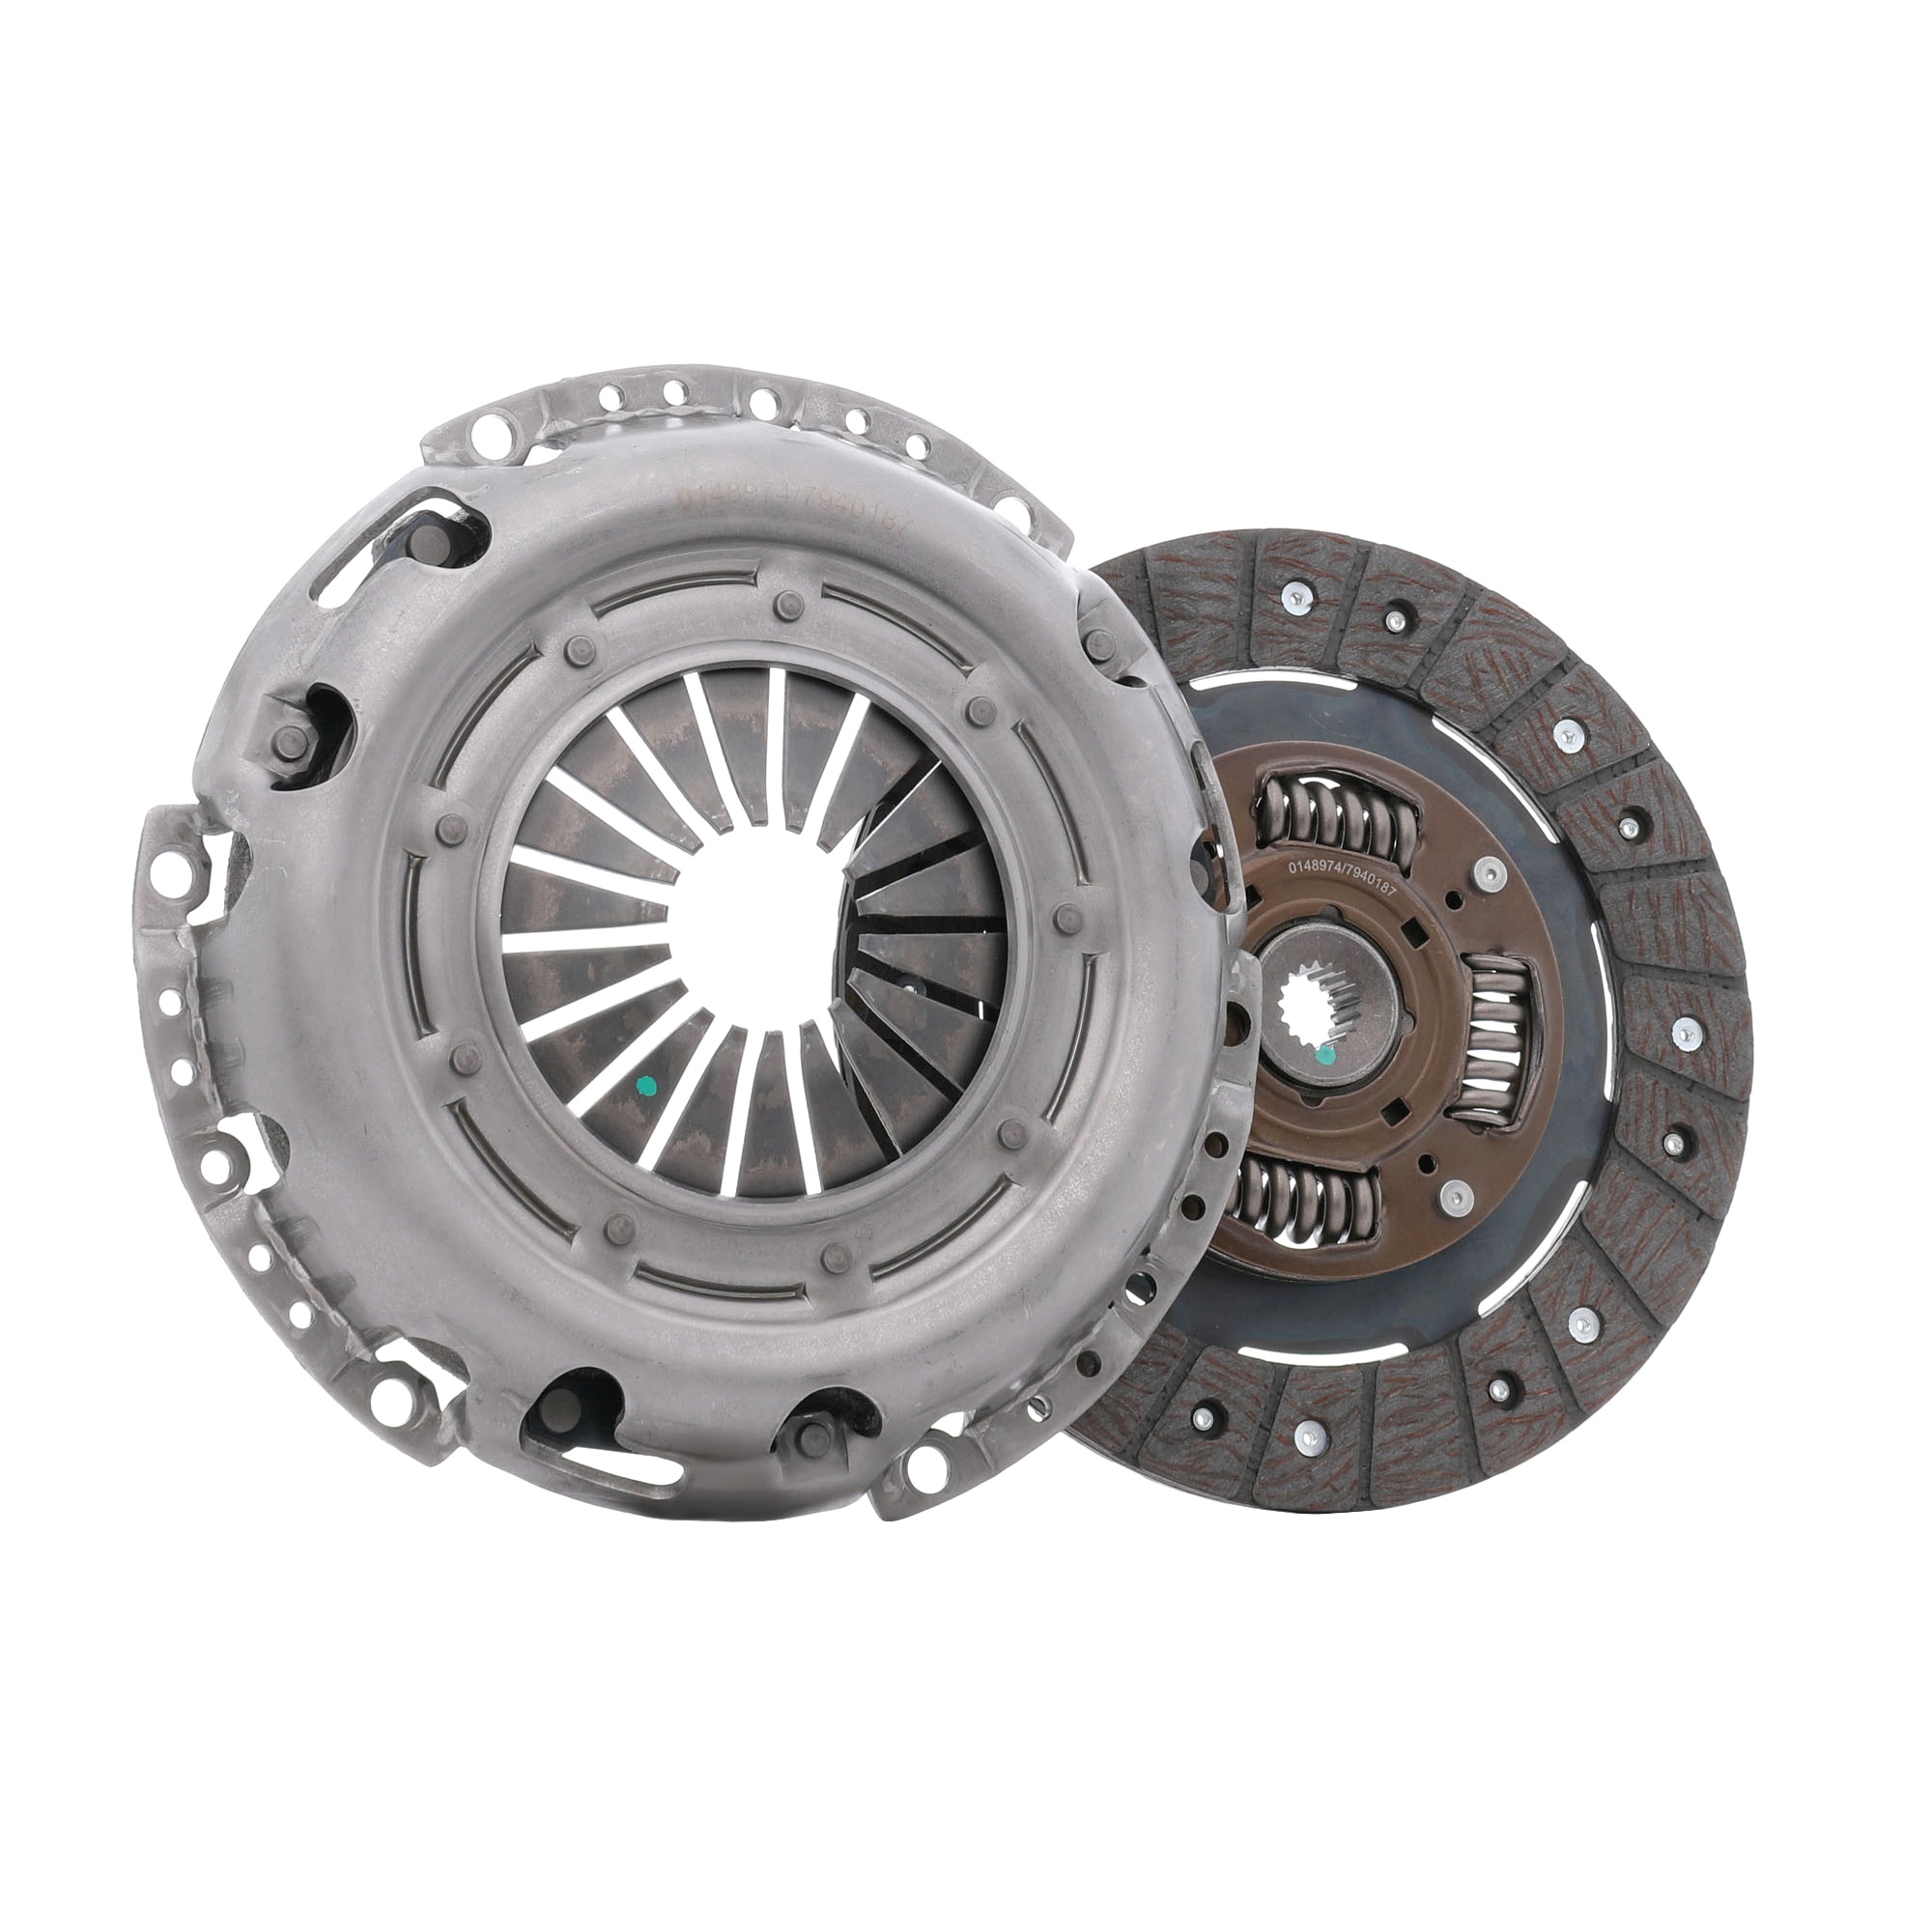 STARK SKCK-0100046 Clutch kit two-piece, with clutch pressure plate, with clutch disc, 220mm